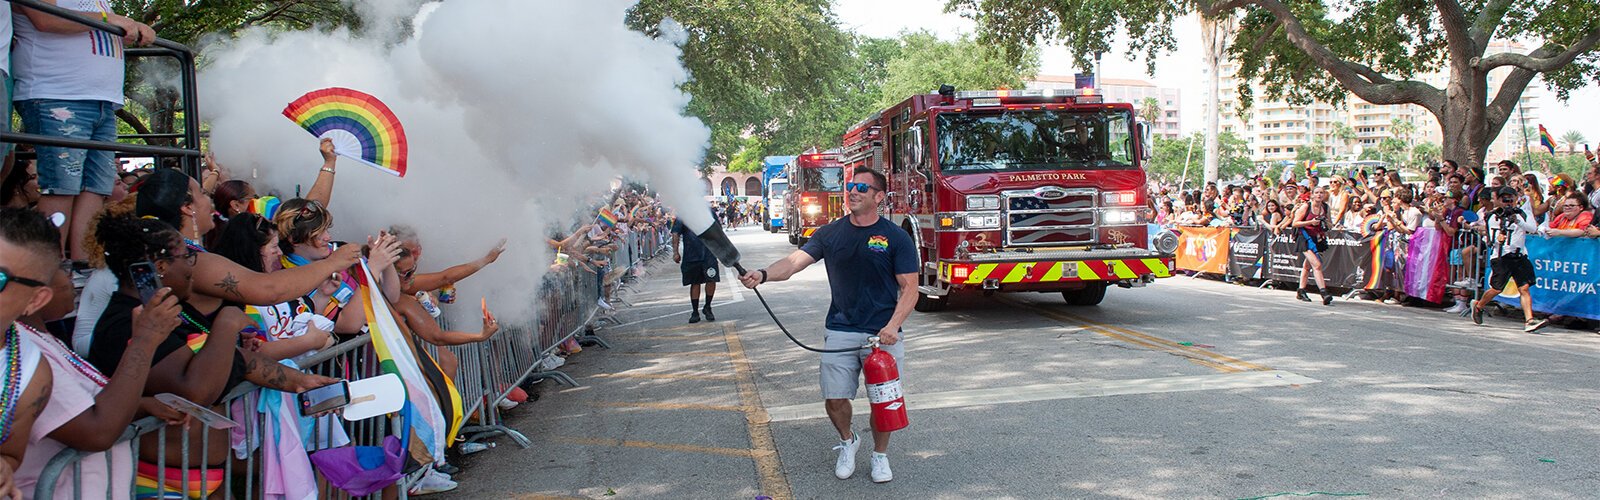  A firefighter from St. Pete Fire and Rescue's Palmetto Park fire station sprays a fire extinguisher into the crowd at this years St Pete Pride Parade.